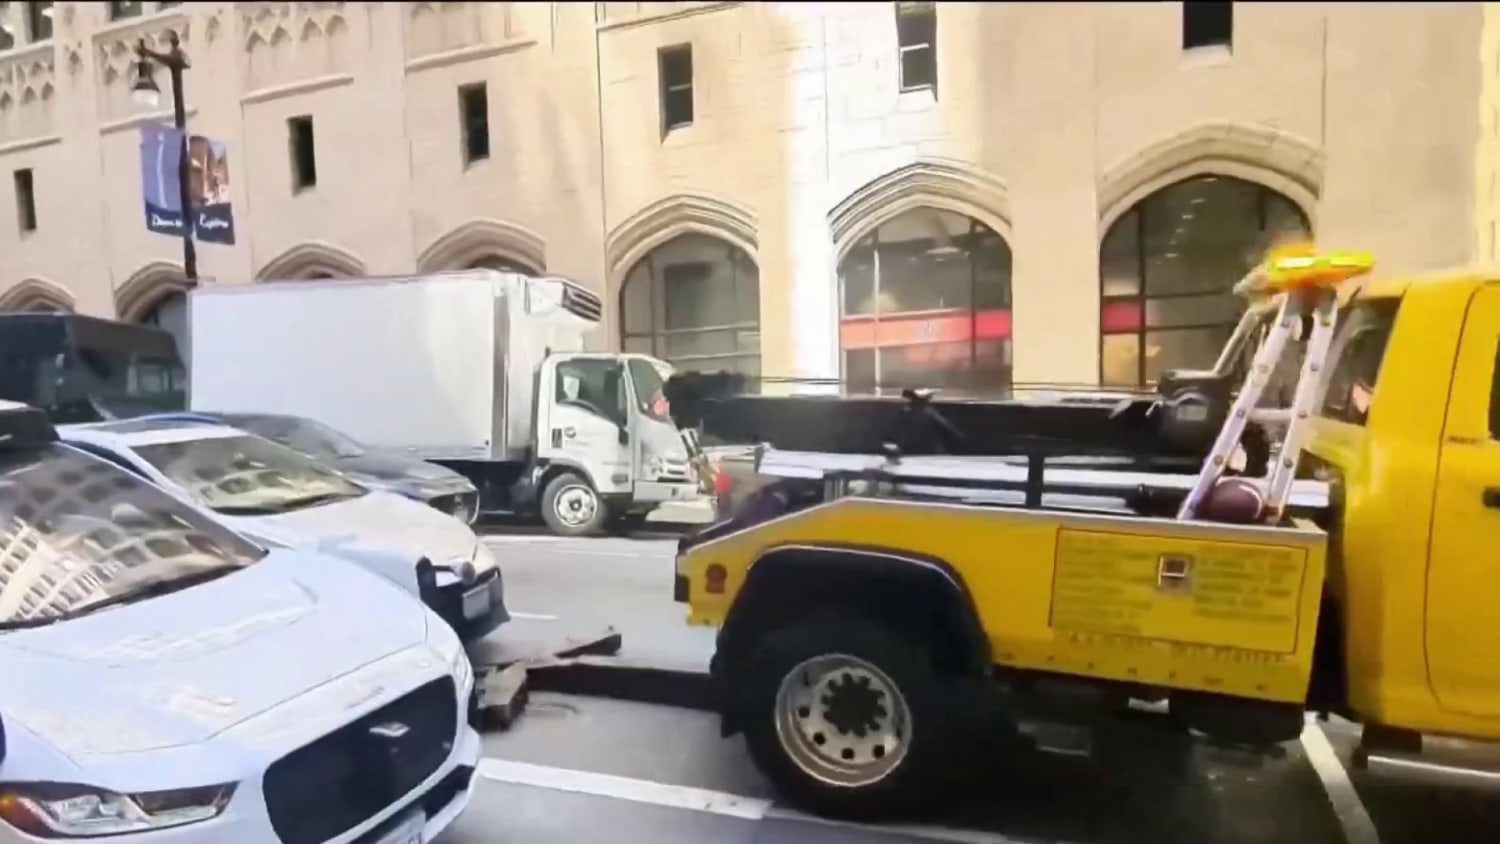 Video shows truck trying to tow car with driver inside – NBC News